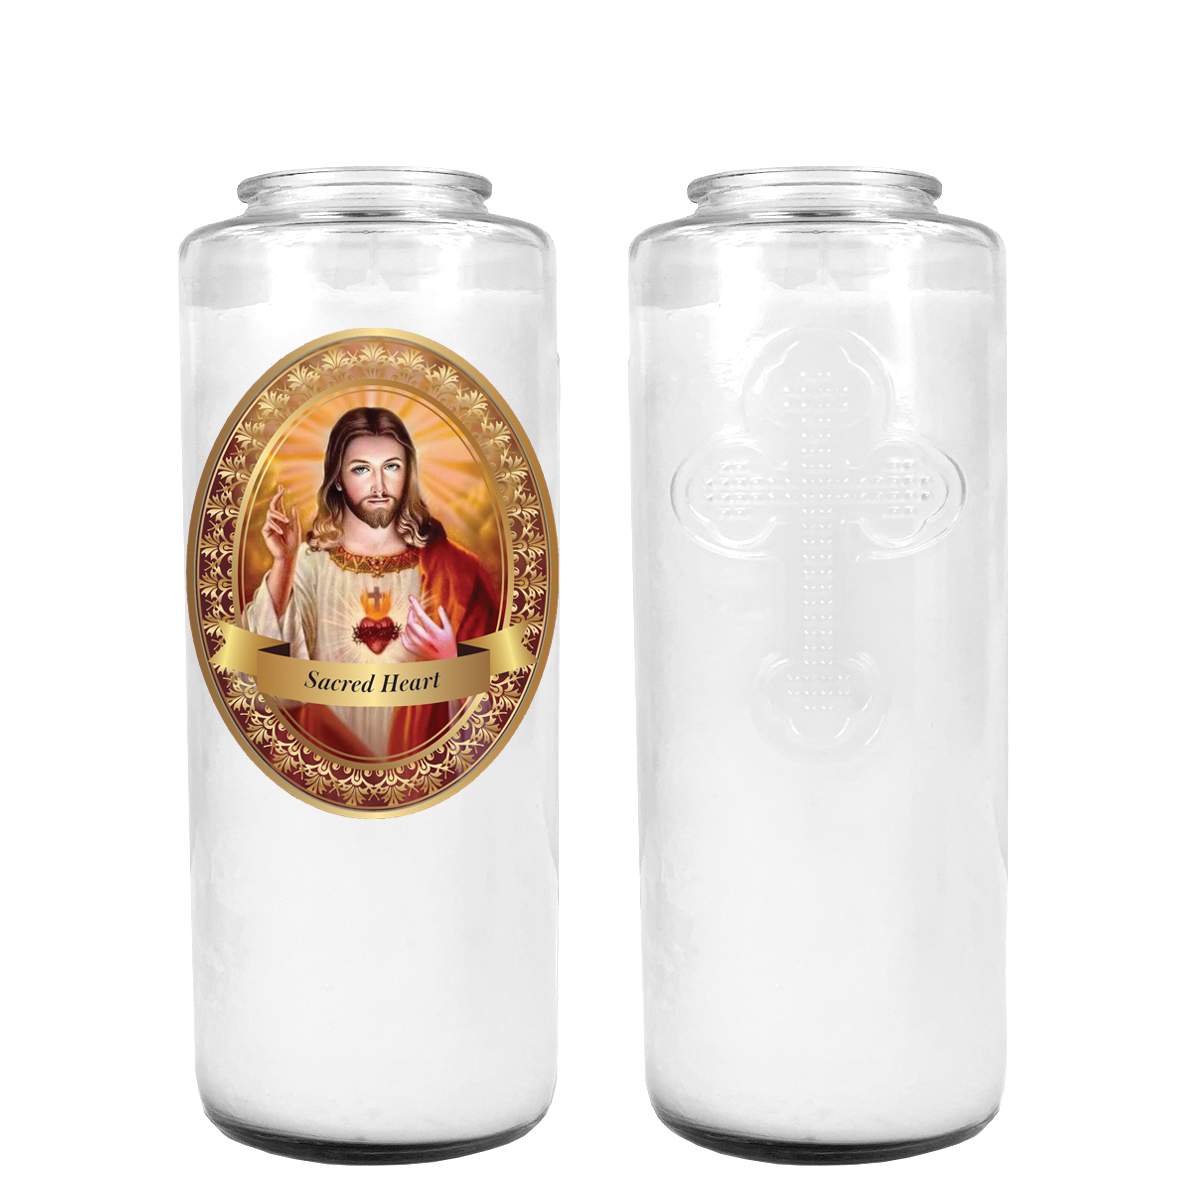 SACRED HEART 5 DAY CANDLE W/ REMOVABLE LABEL